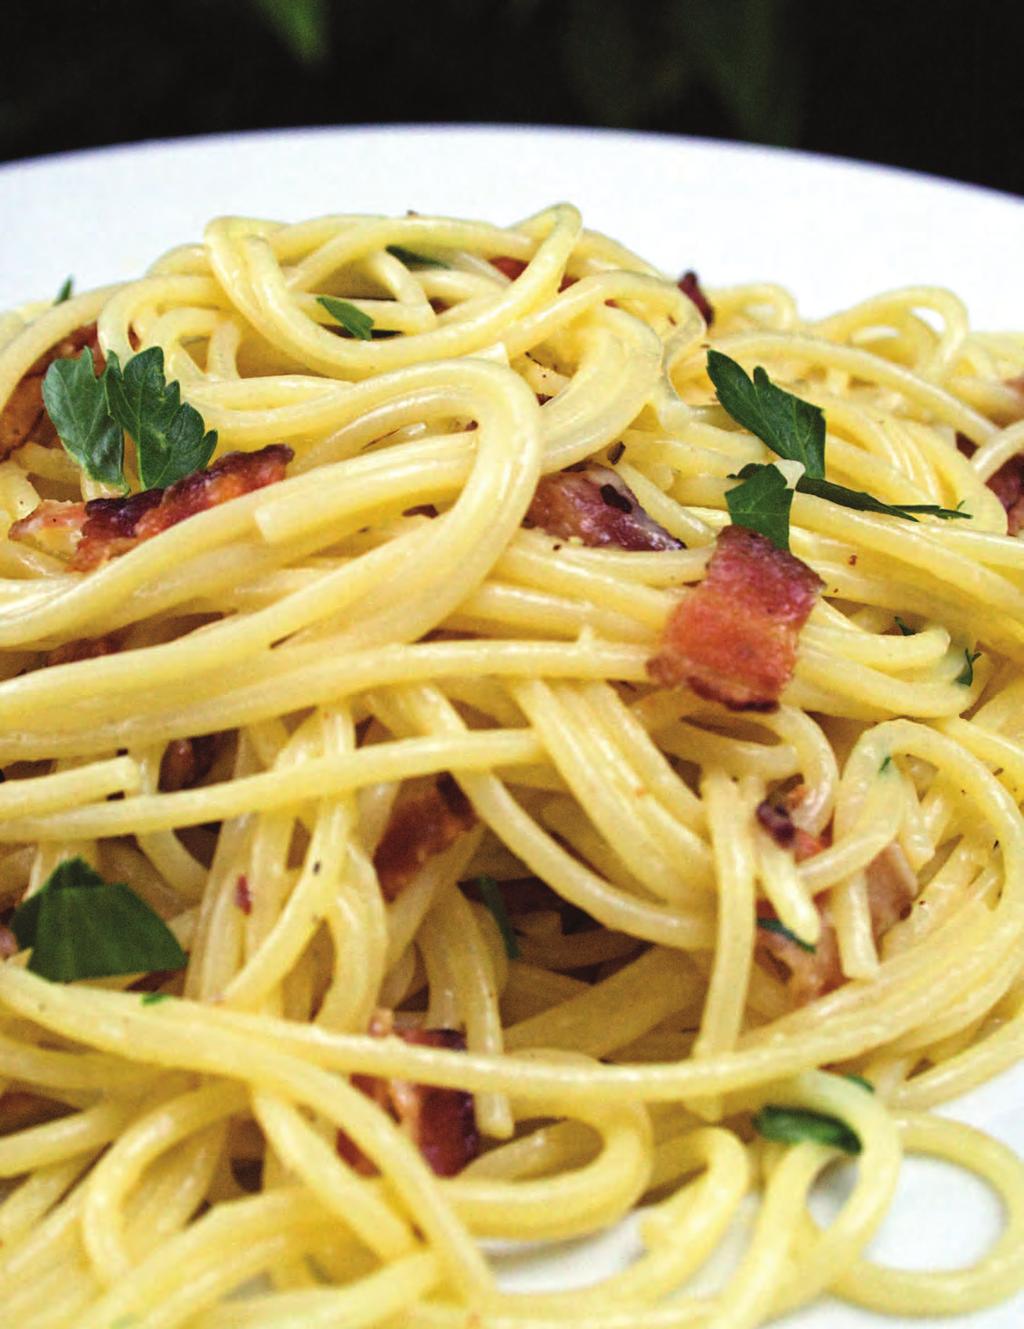 Serve Carbonara quickly! Connoisseurs serve Carbonara on heated plates to retain the heat and creaminess of the sauce. 1 (16-oz) pkg spaghetti 1 (3.